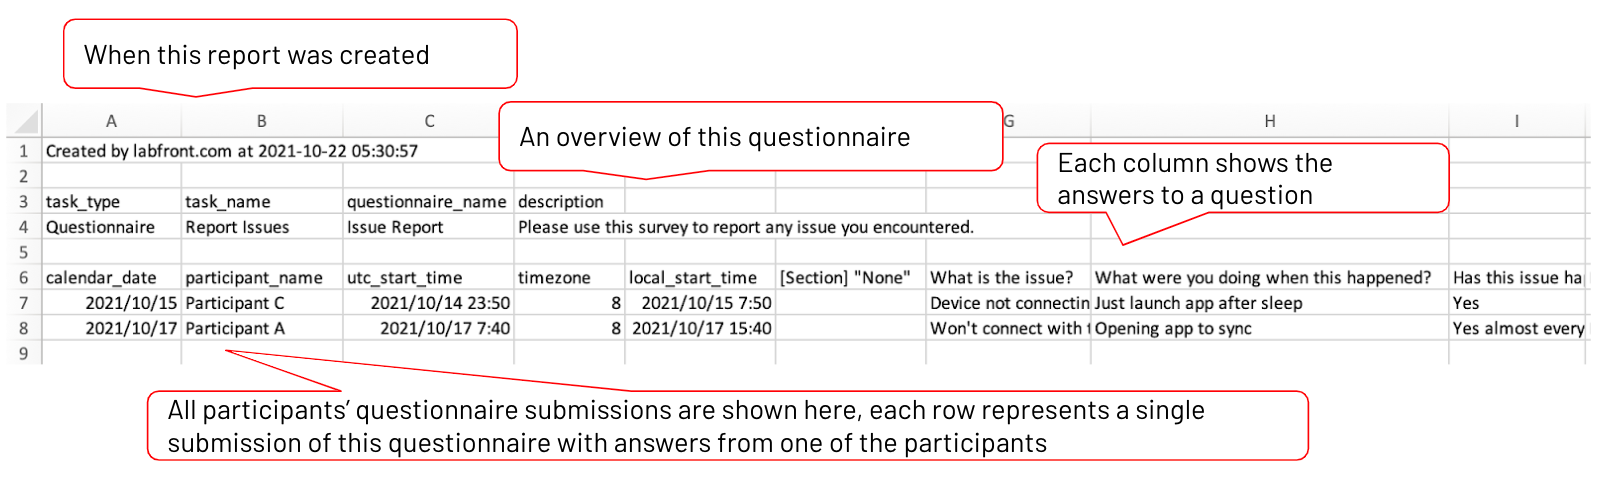 CSV file of questionnaire data with report date, overview of questionnaire, and all submissions